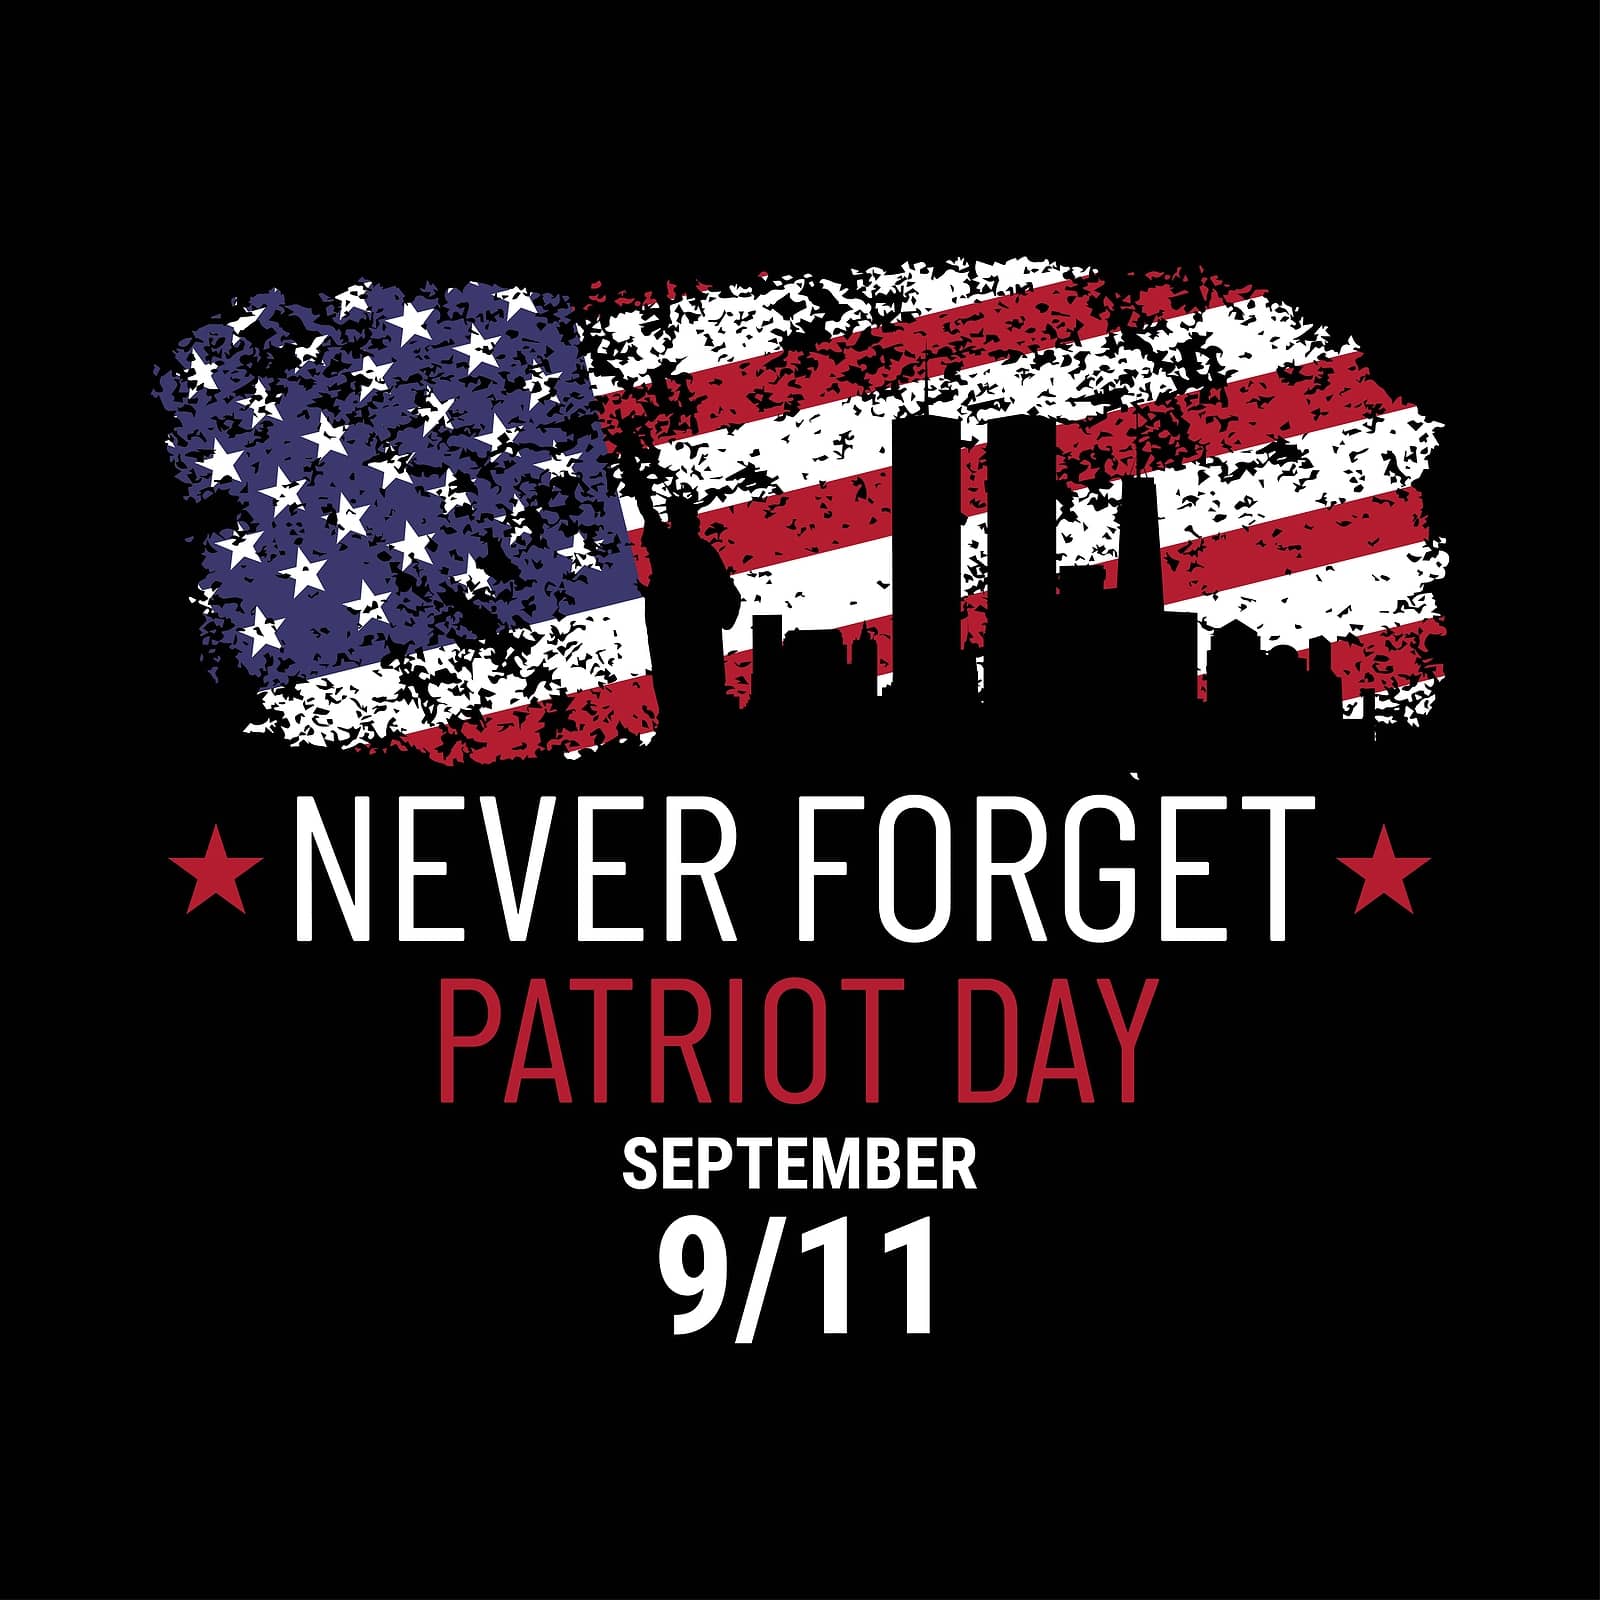 patriot-day-illustration-we-will-newer-forget-911-september